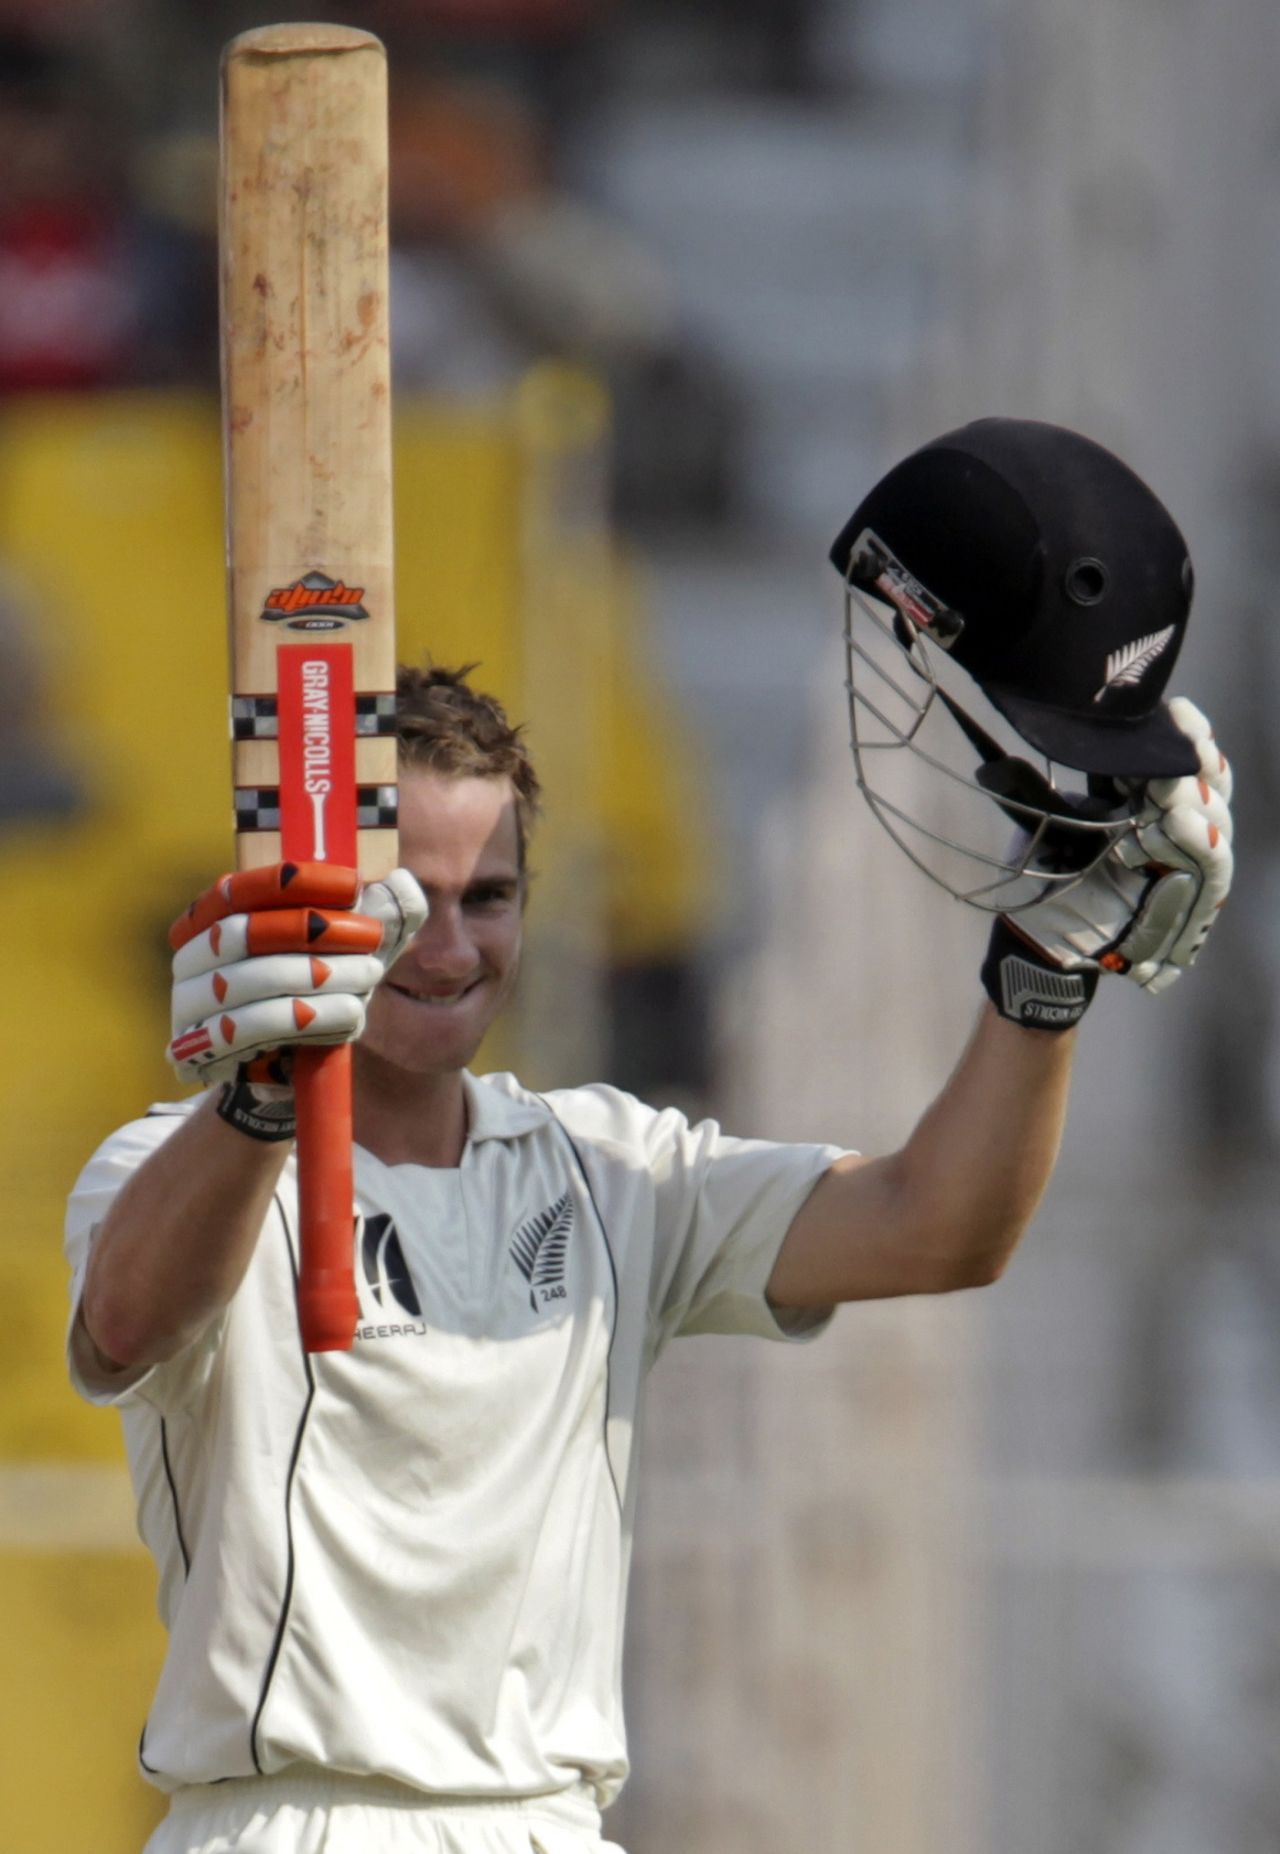 A baby-faced Kane Williamson made his Test debut in 2010 aged 20. Don't go by the looks as he became only the eighth New Zealand batter to score a century on debut against India, India vs New Zealand, 1st Test, Ahmedabad, day four, November 7, 2010